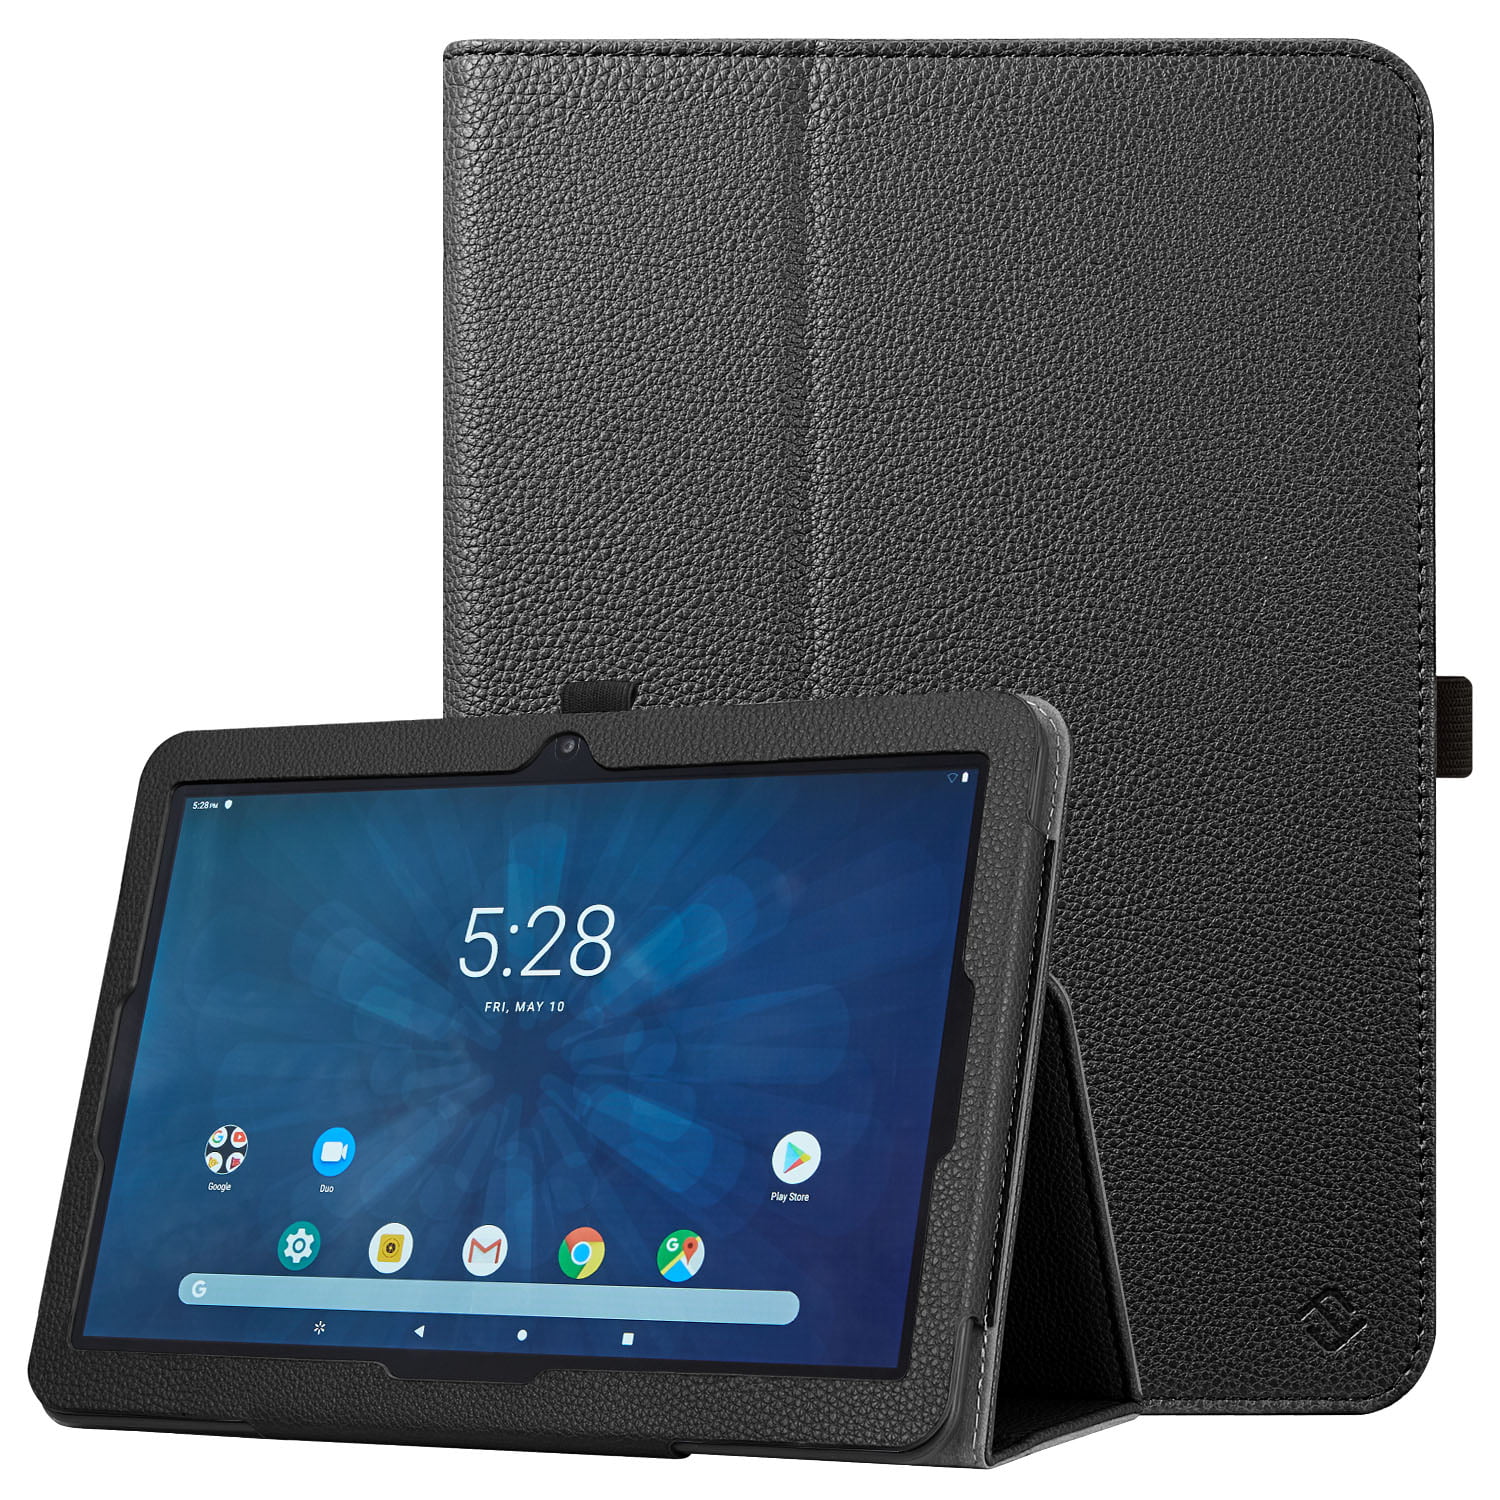 Tablet Case for 2019 Onn 10" 10.1 Inch Android Tablet